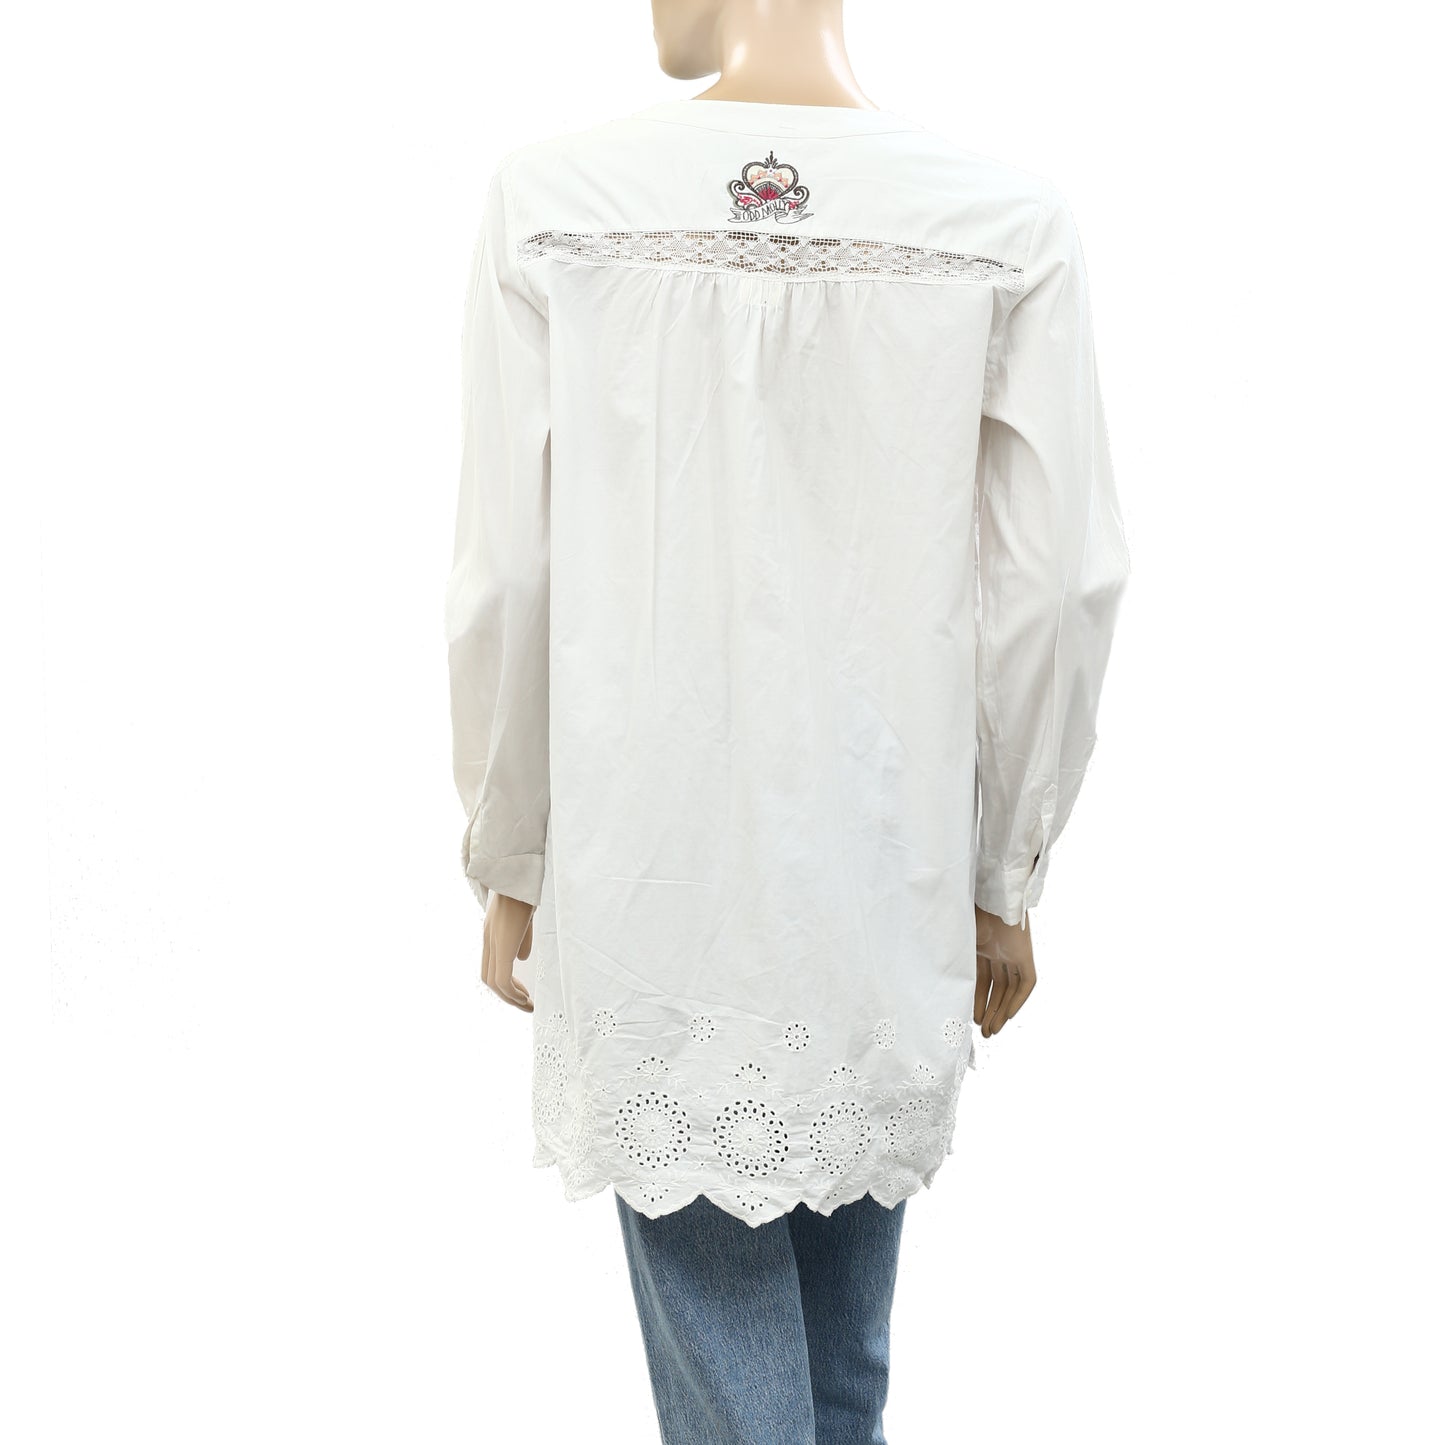 Odd Molly Anthropologie Lace Eyelet Embroidered Shirt Tunic Top